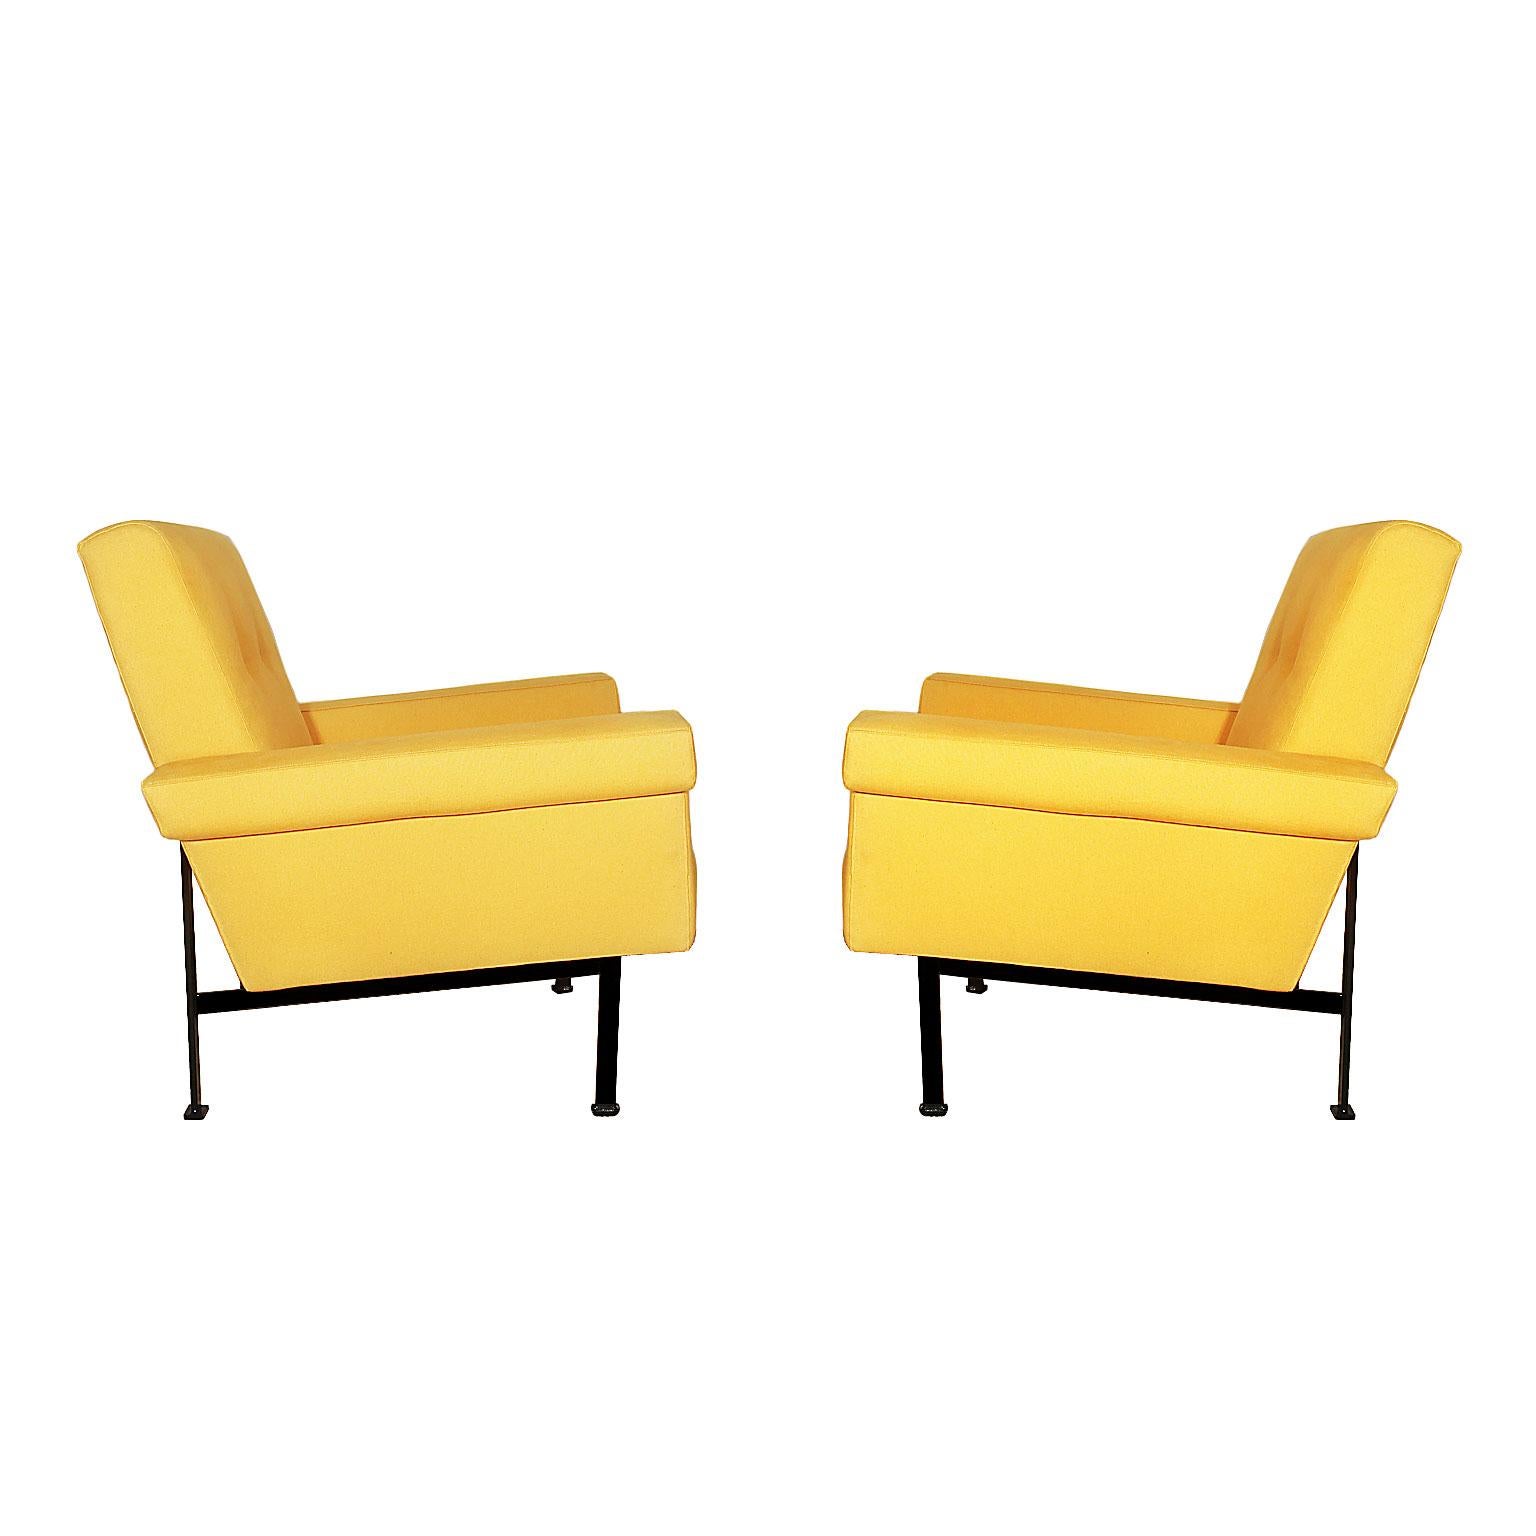 Pair of cubist armchairs, completely restored, yellow cotton upholstery, black lacquered wrought iron stands,
Italy, circa 1960.